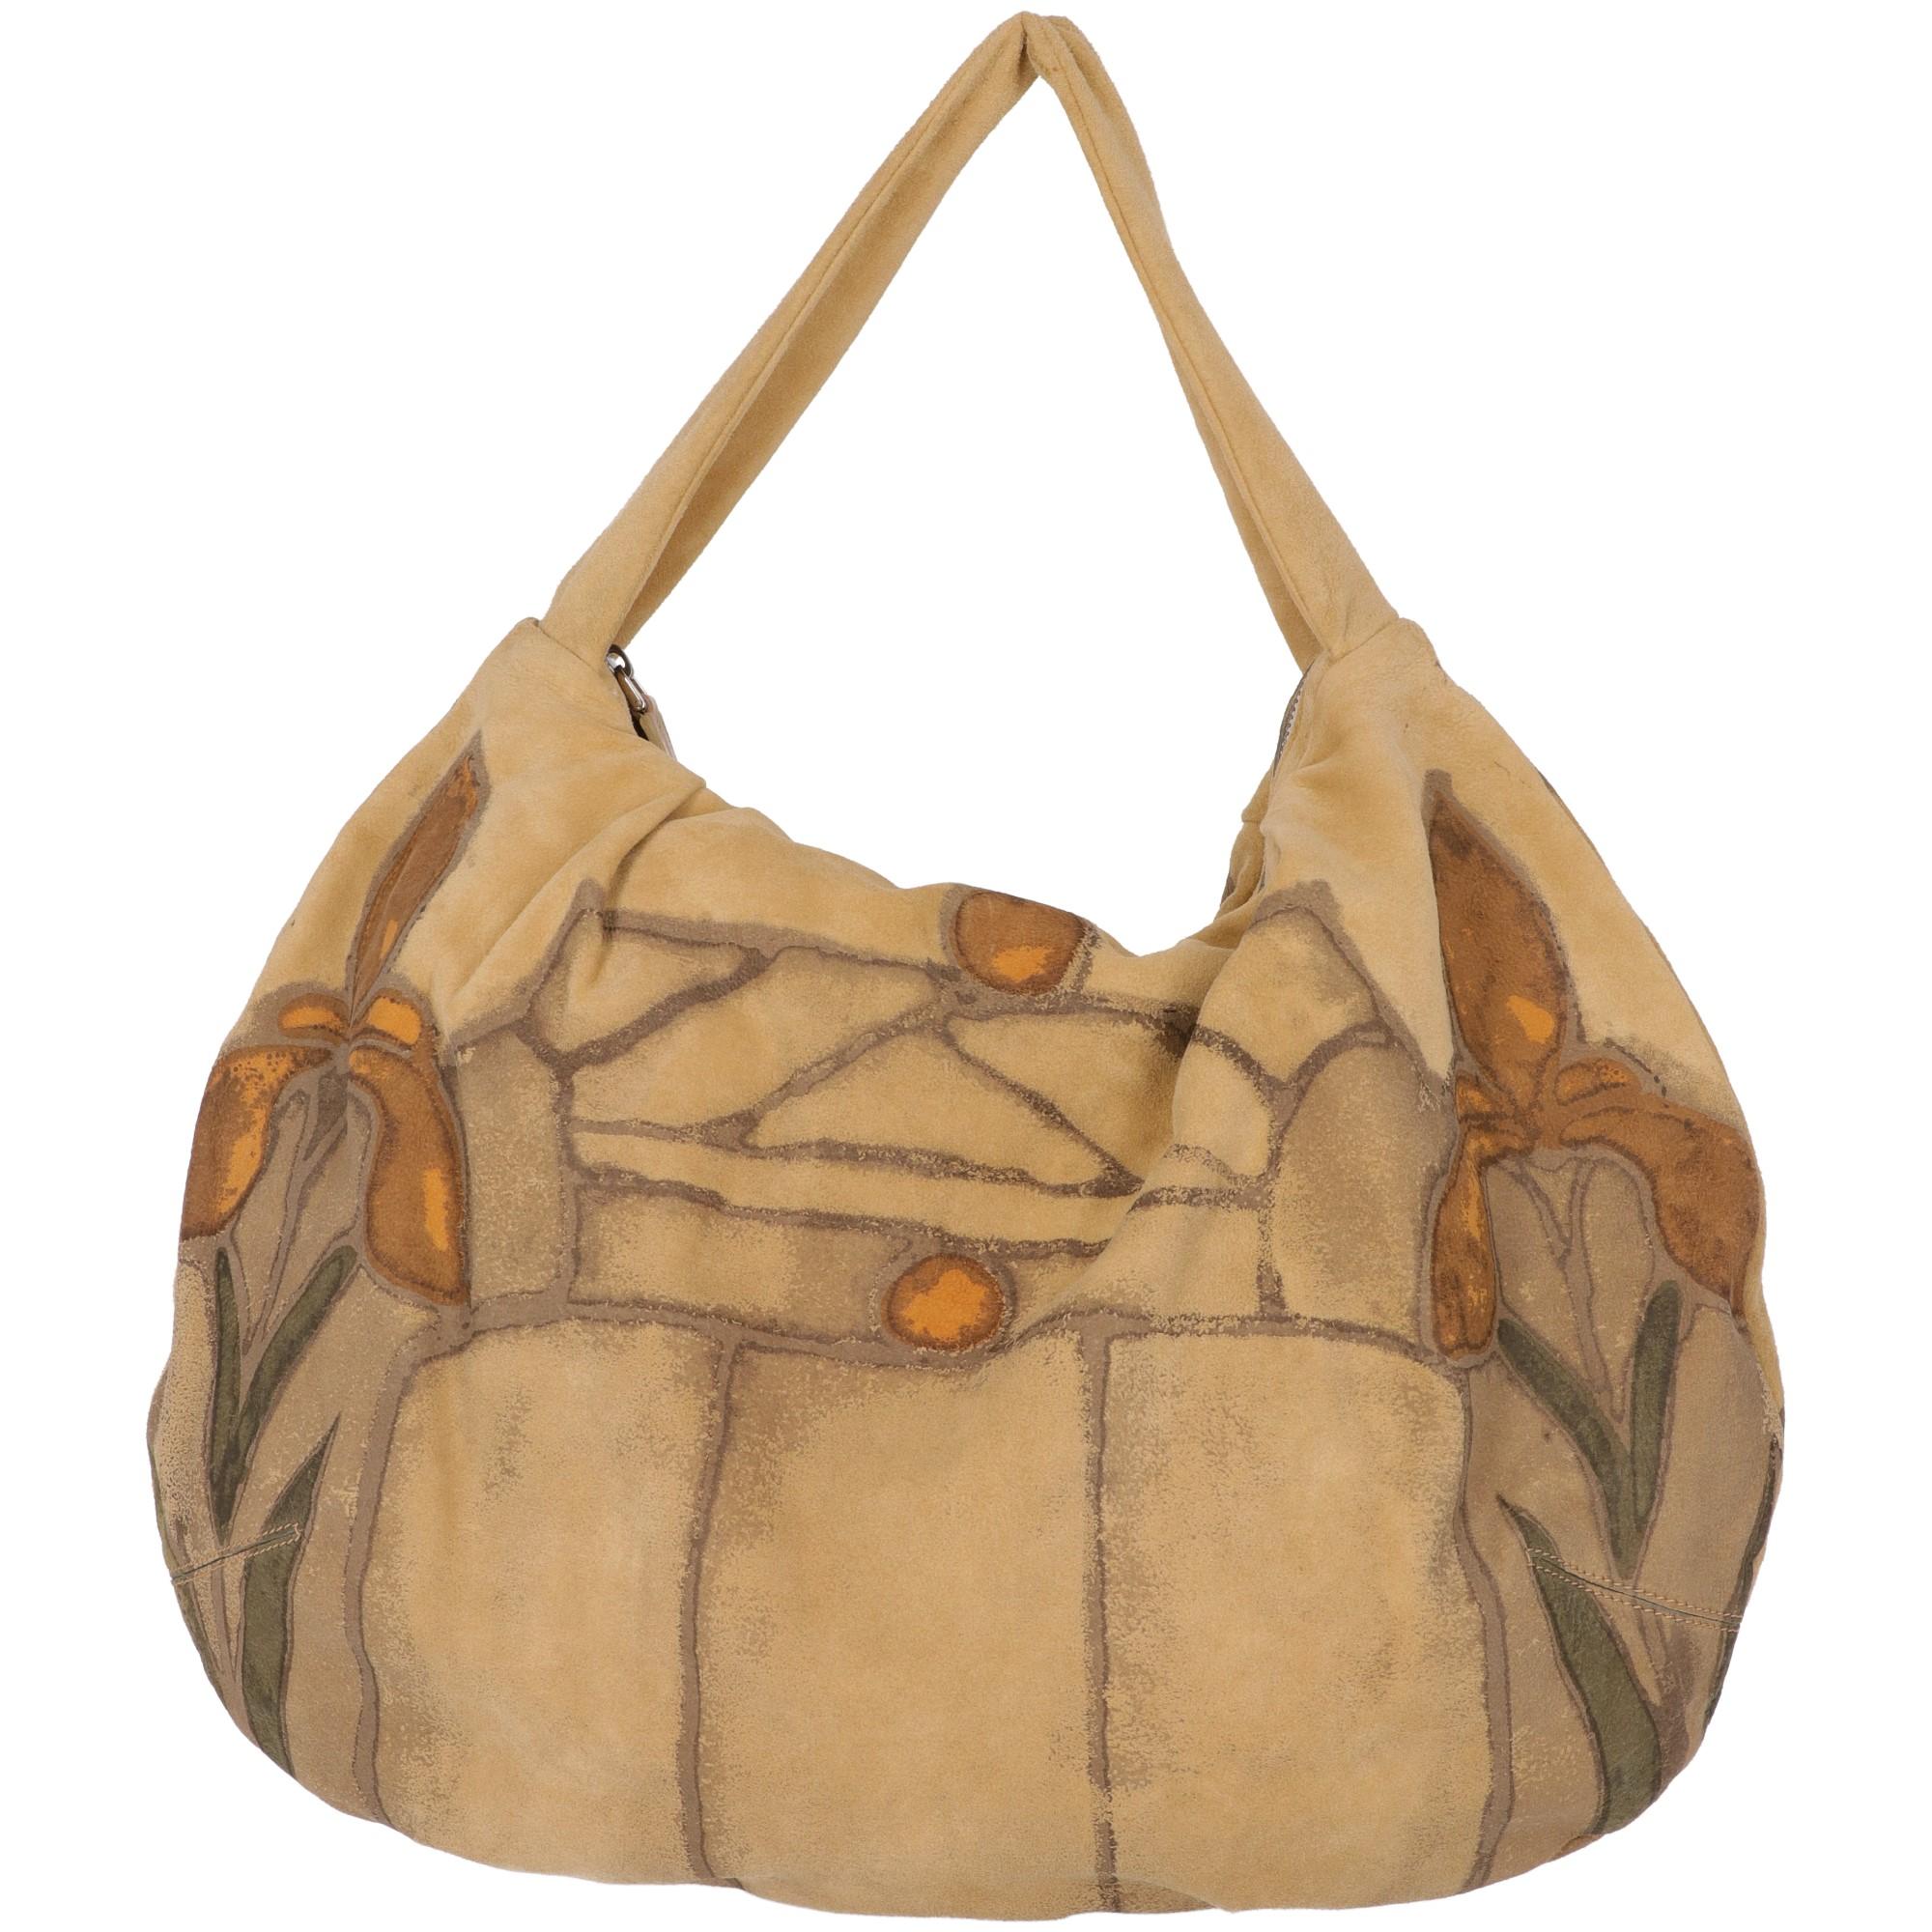 The stylish Marni beige suede handbag with grey, yellow and teal colored fancy print, features a zip fastening and a suede handle. The bag is lined, with an inner zip pocket.
The item shows small stains on the lining, as shown in the